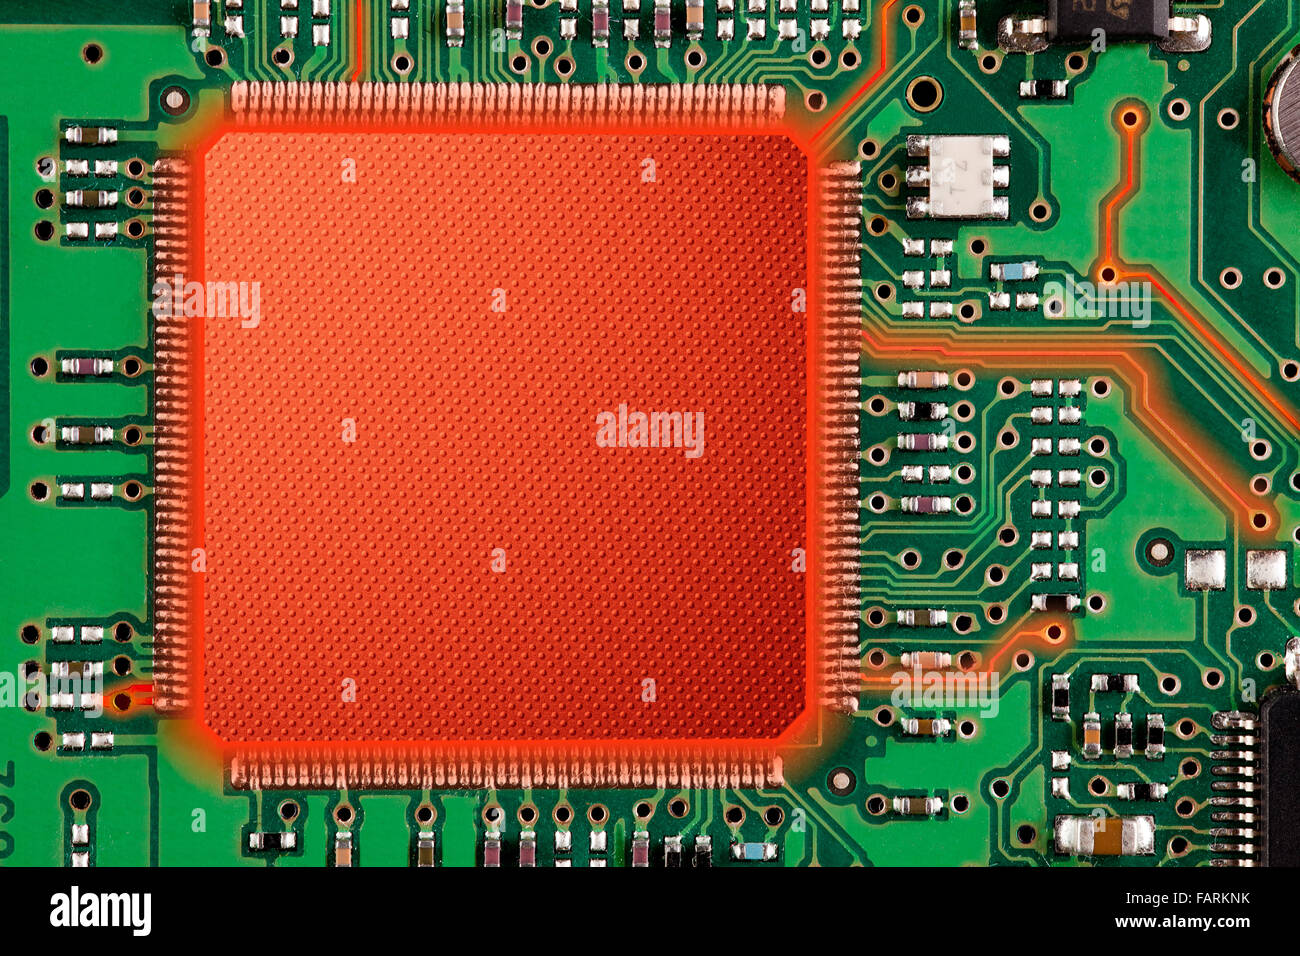 green and red printed circuit board or computer technology background Stock Photo